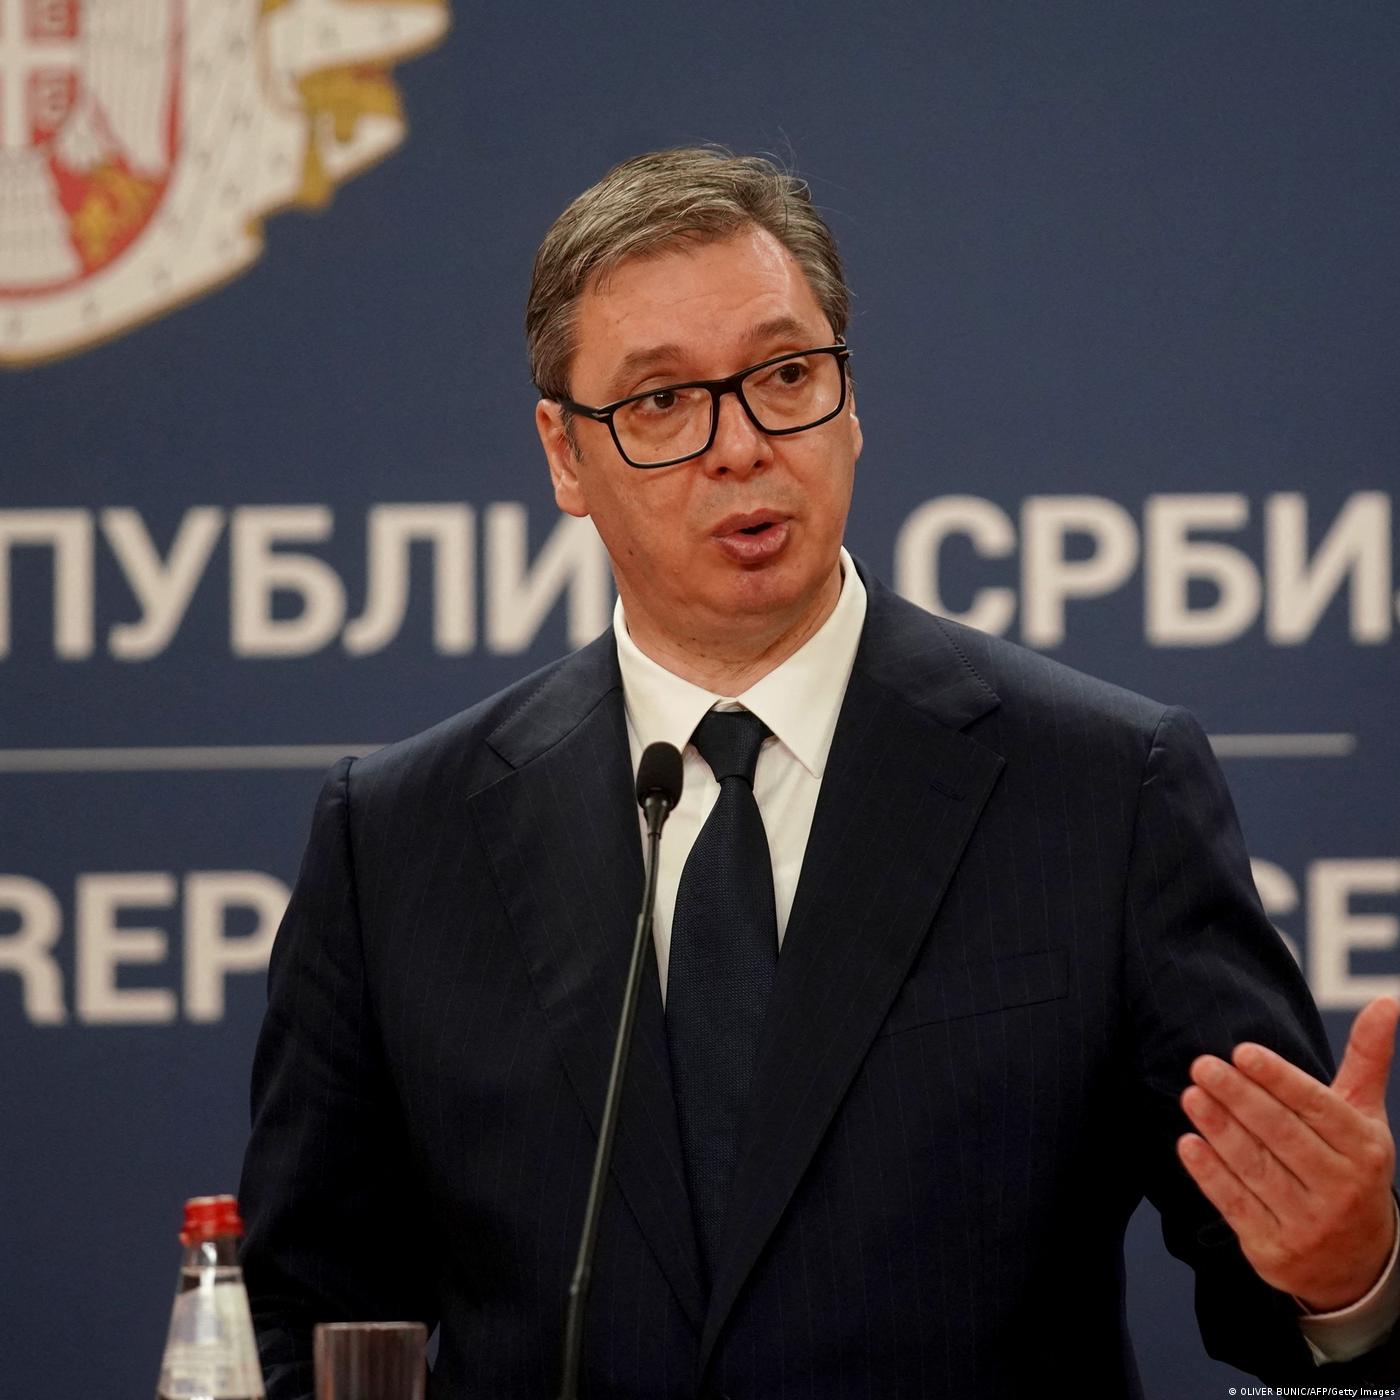 Serbia’s election — is change on the horizon?